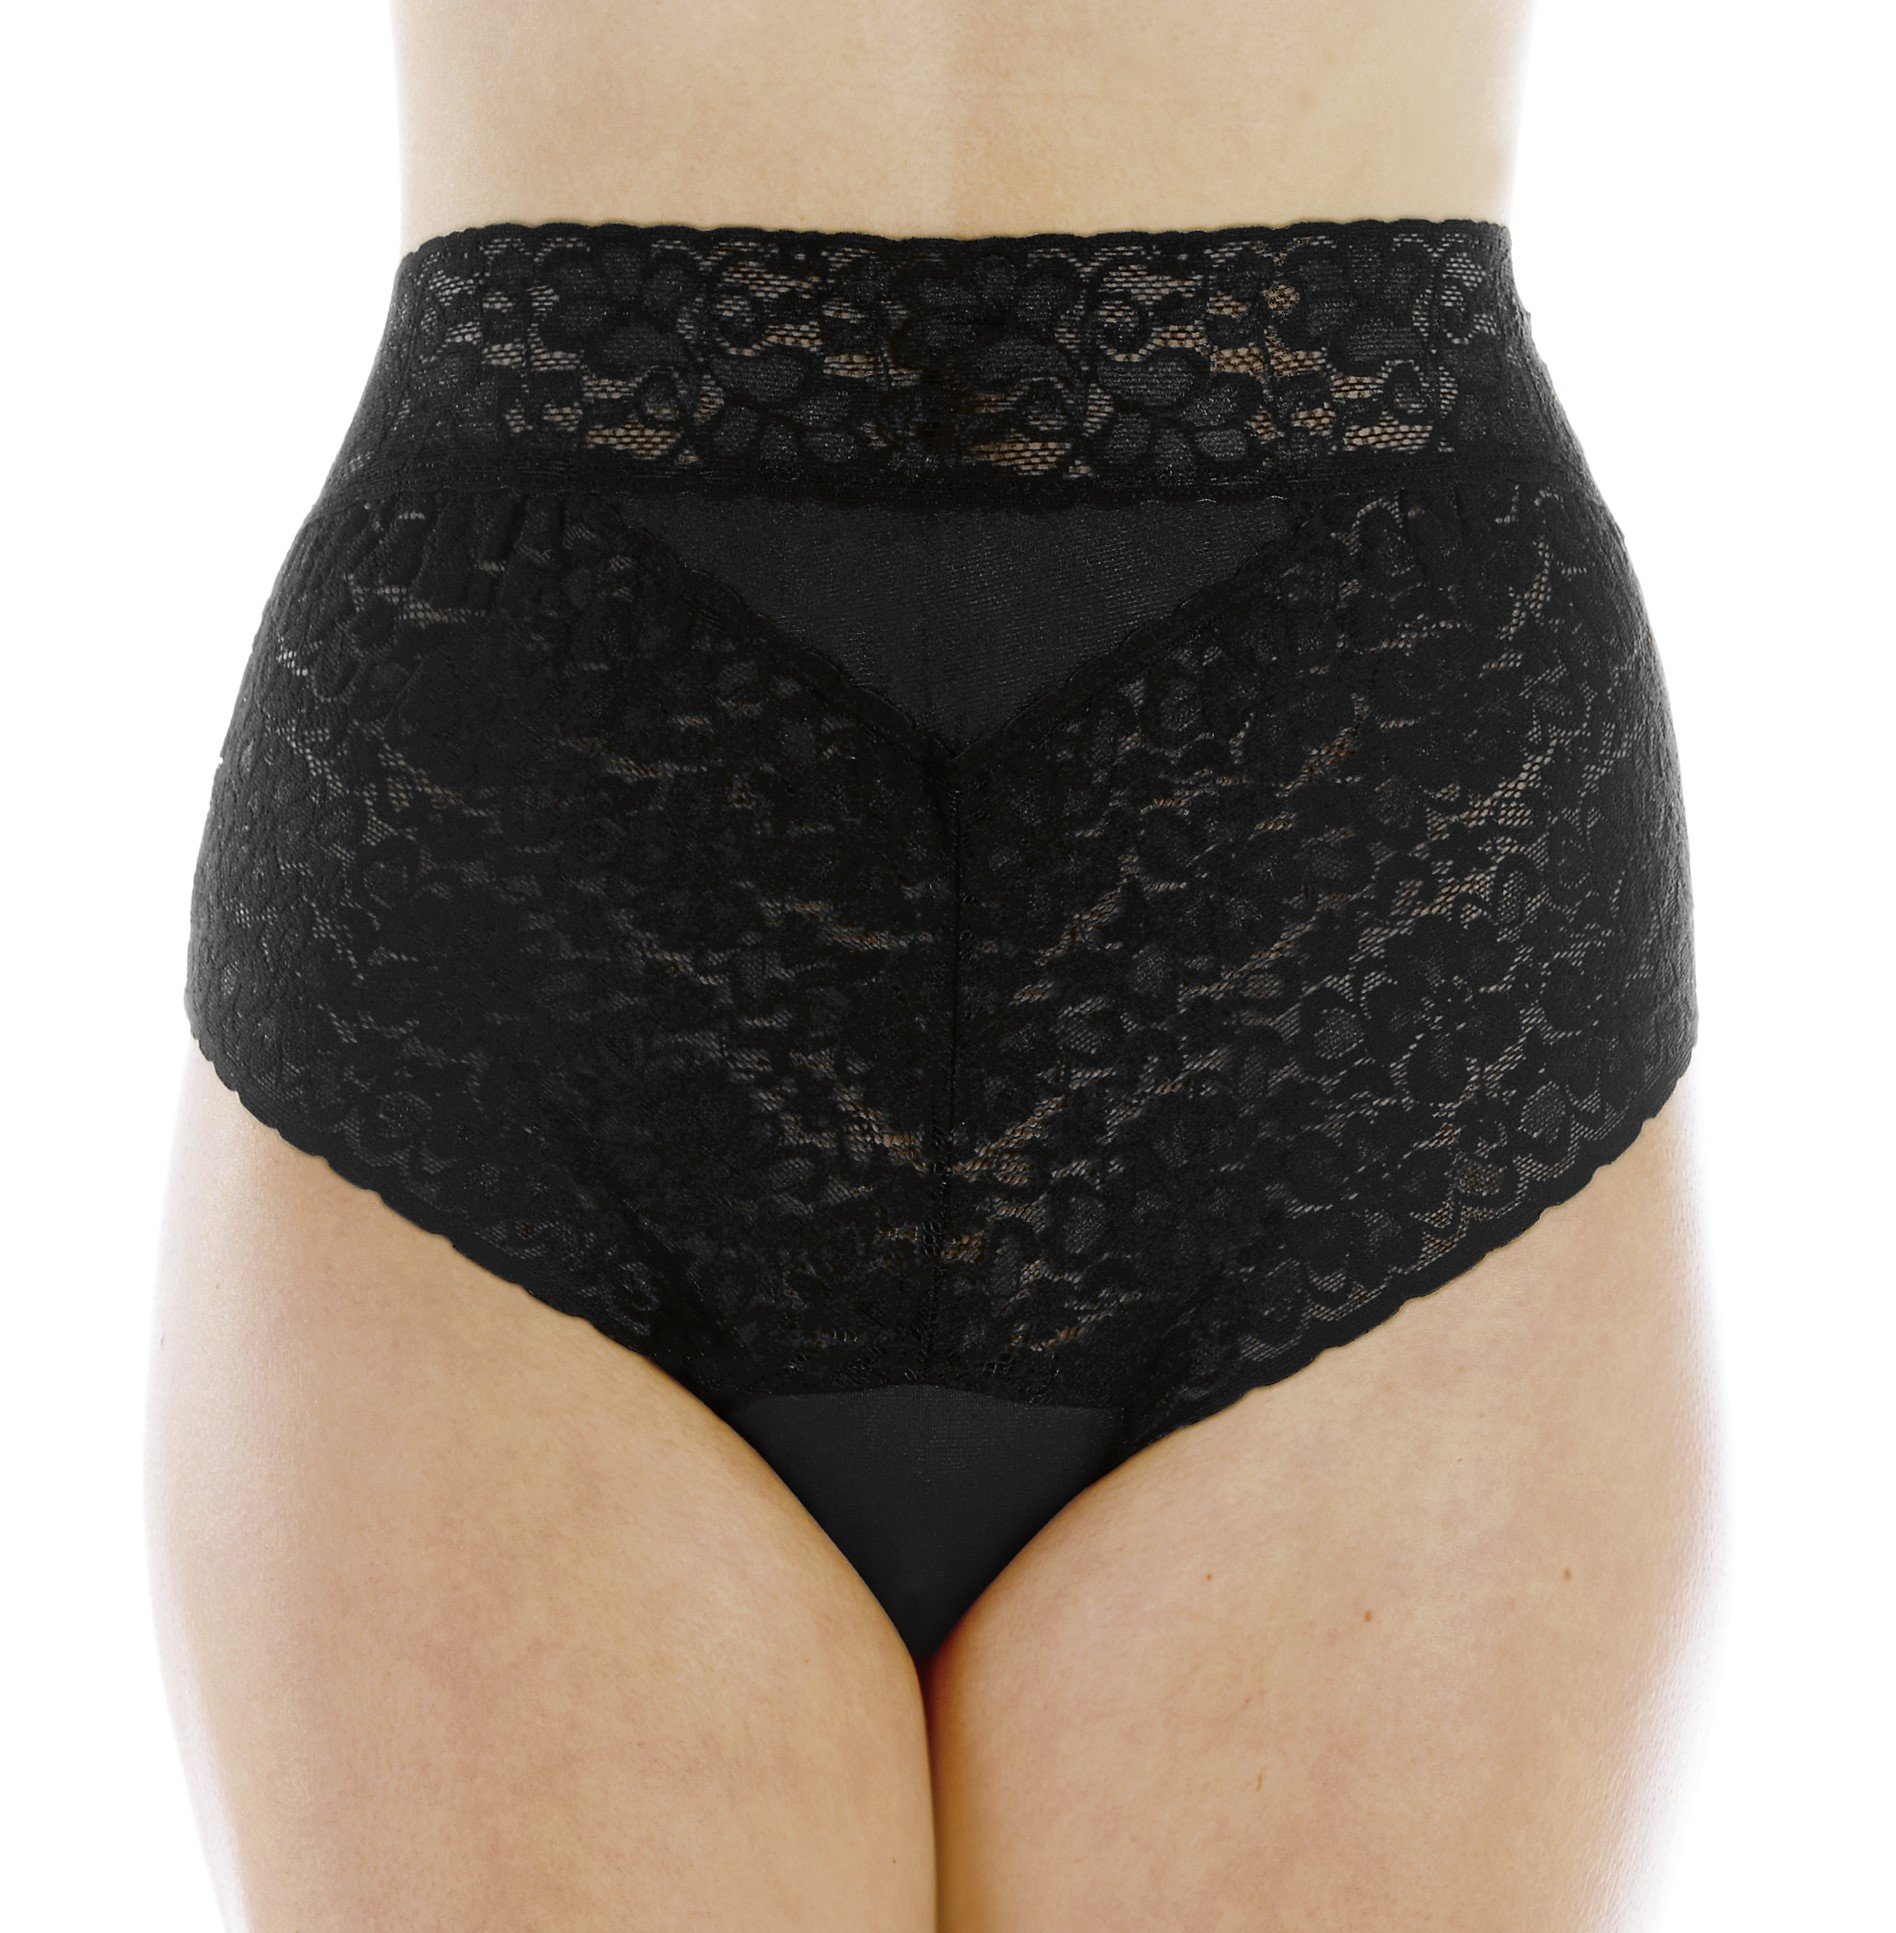 Seamless Lace Underwear in Nairobi Central - Clothing, Absolute